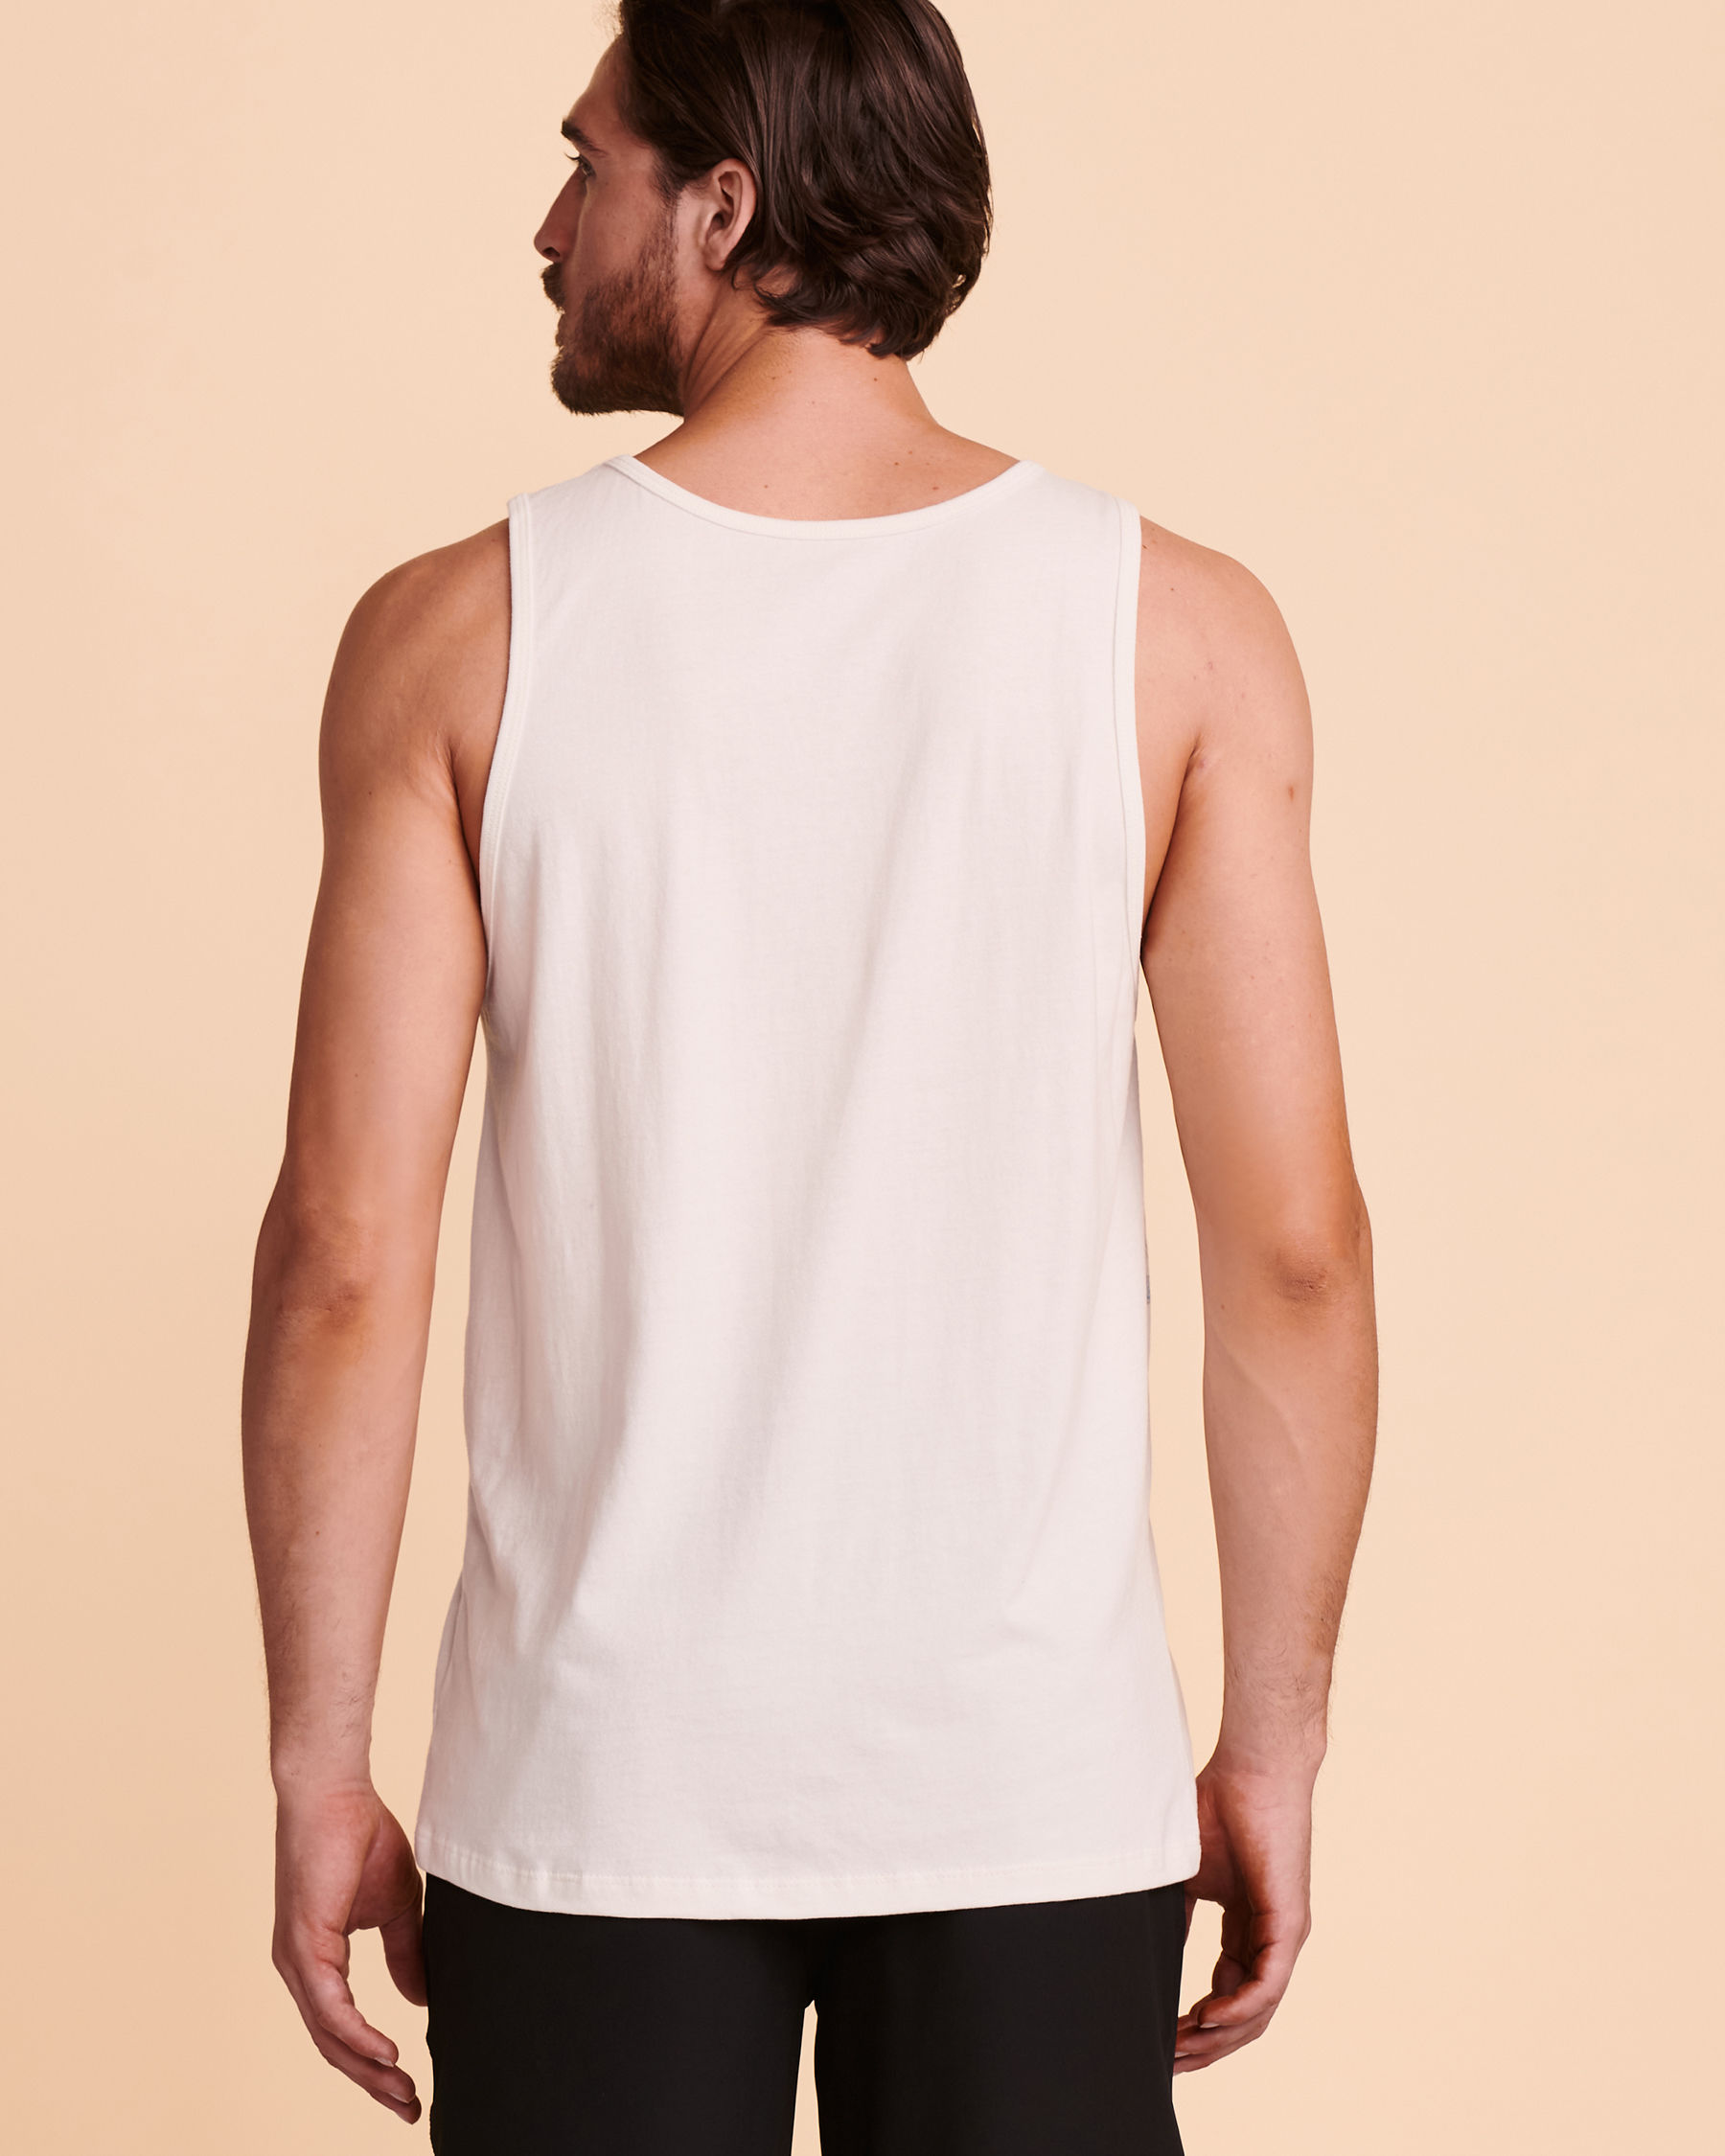 O'NEILL Tank Top White SP0123320C - View2